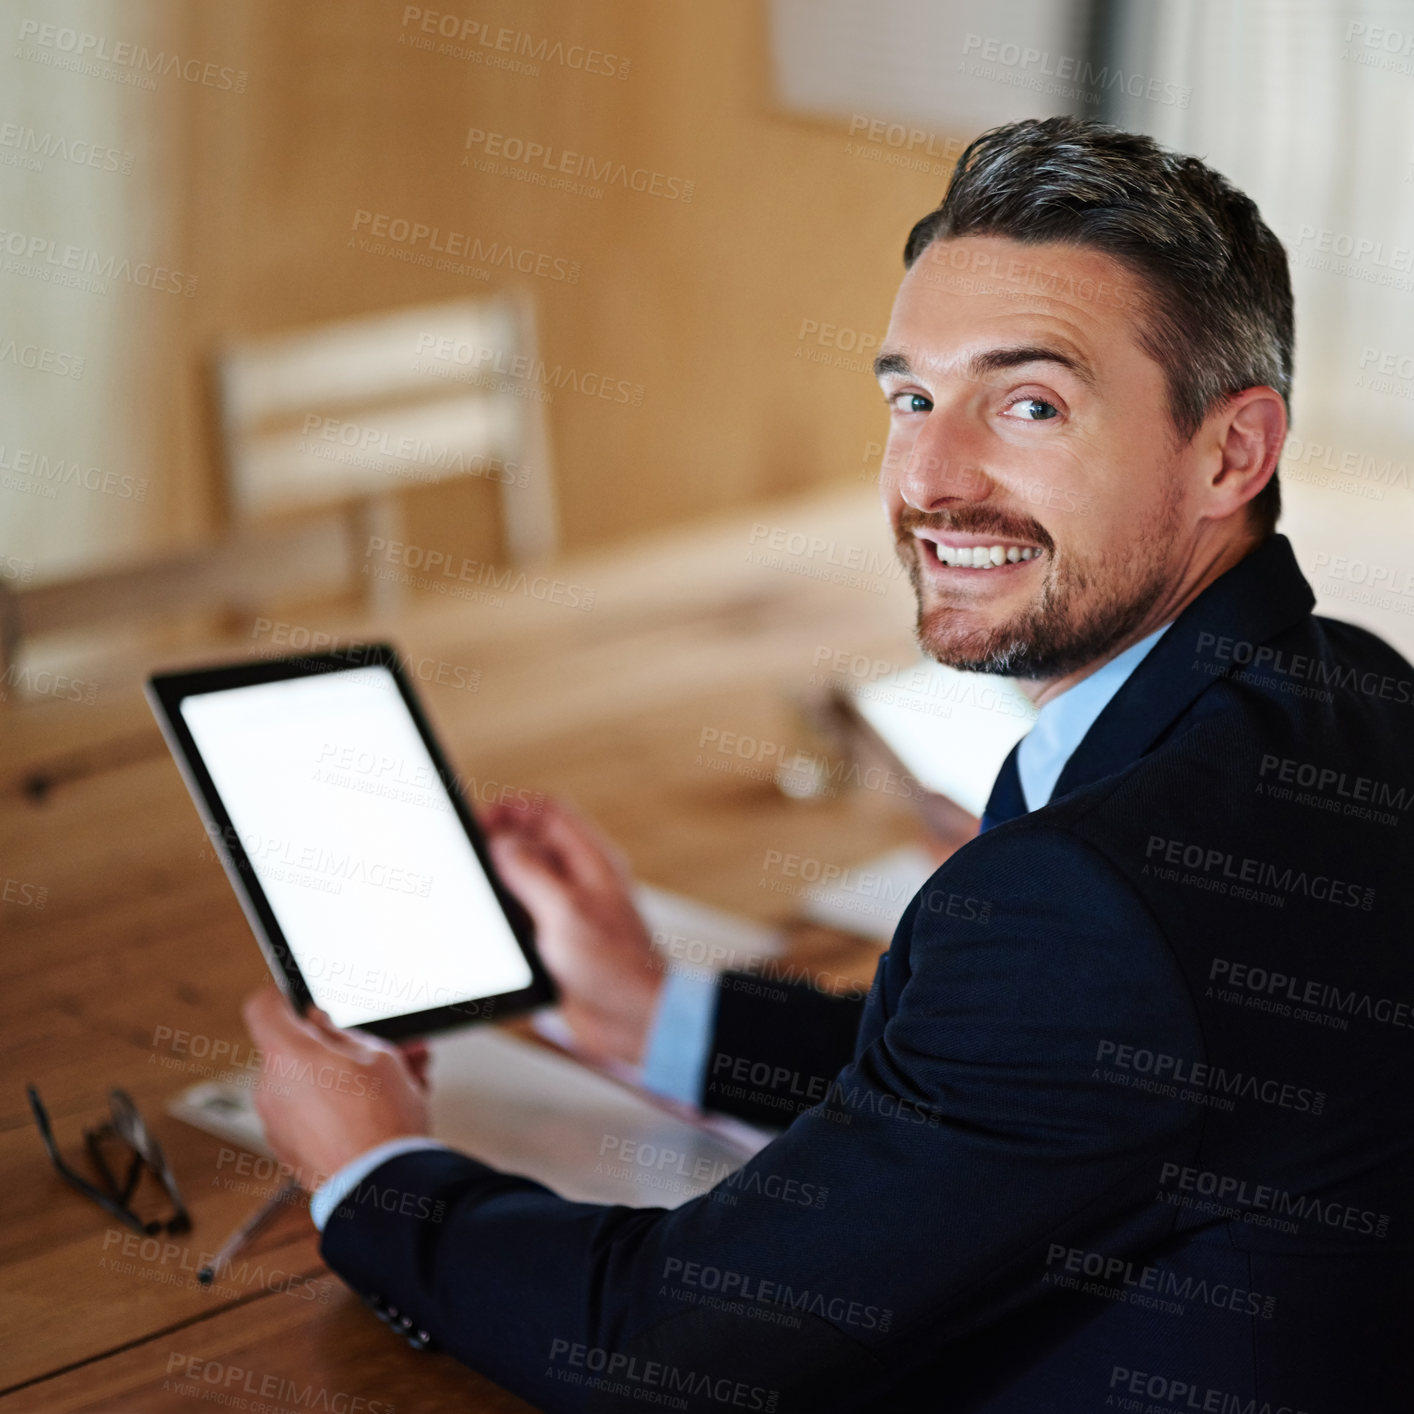 Buy stock photo Portrait of a smiling executive using a digital tablet while sitting alone at a table in an office